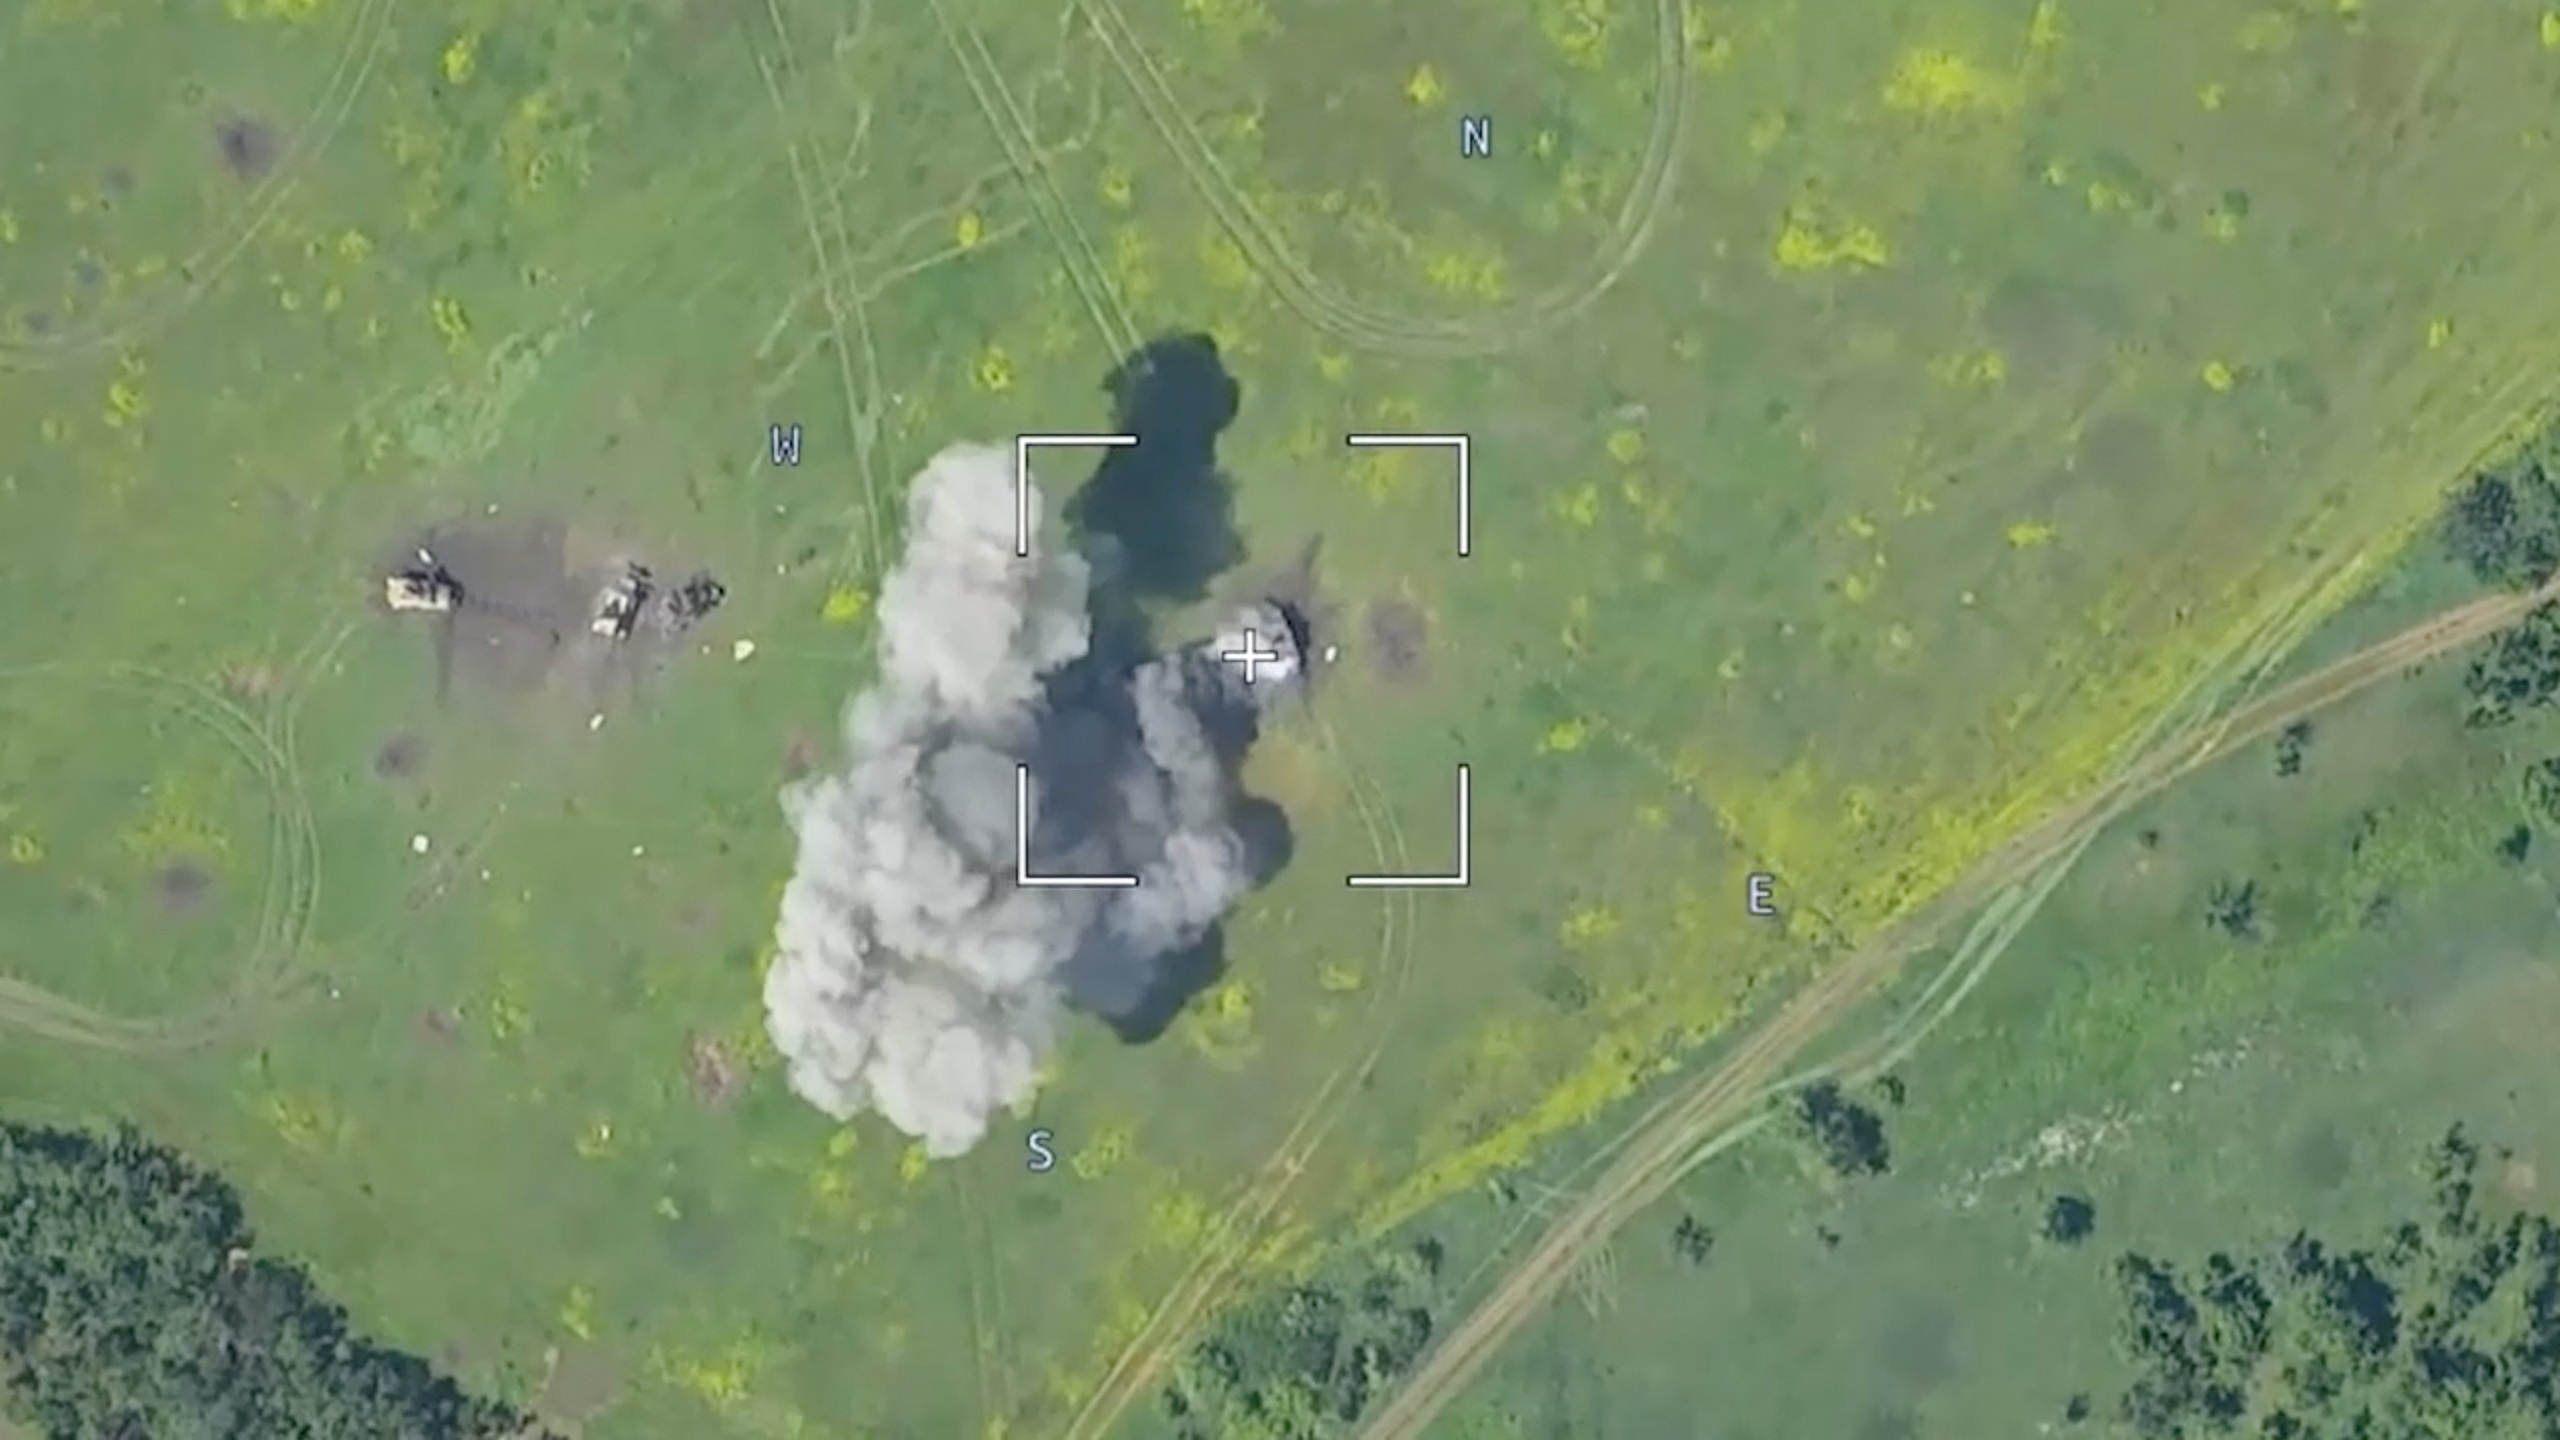 Drone footage shows a burning armoured vehicle in an unidentified location after the Defence Ministry in Moscow said that Russian forces have thwarted a major Ukrainian offensive in the Donetsk region